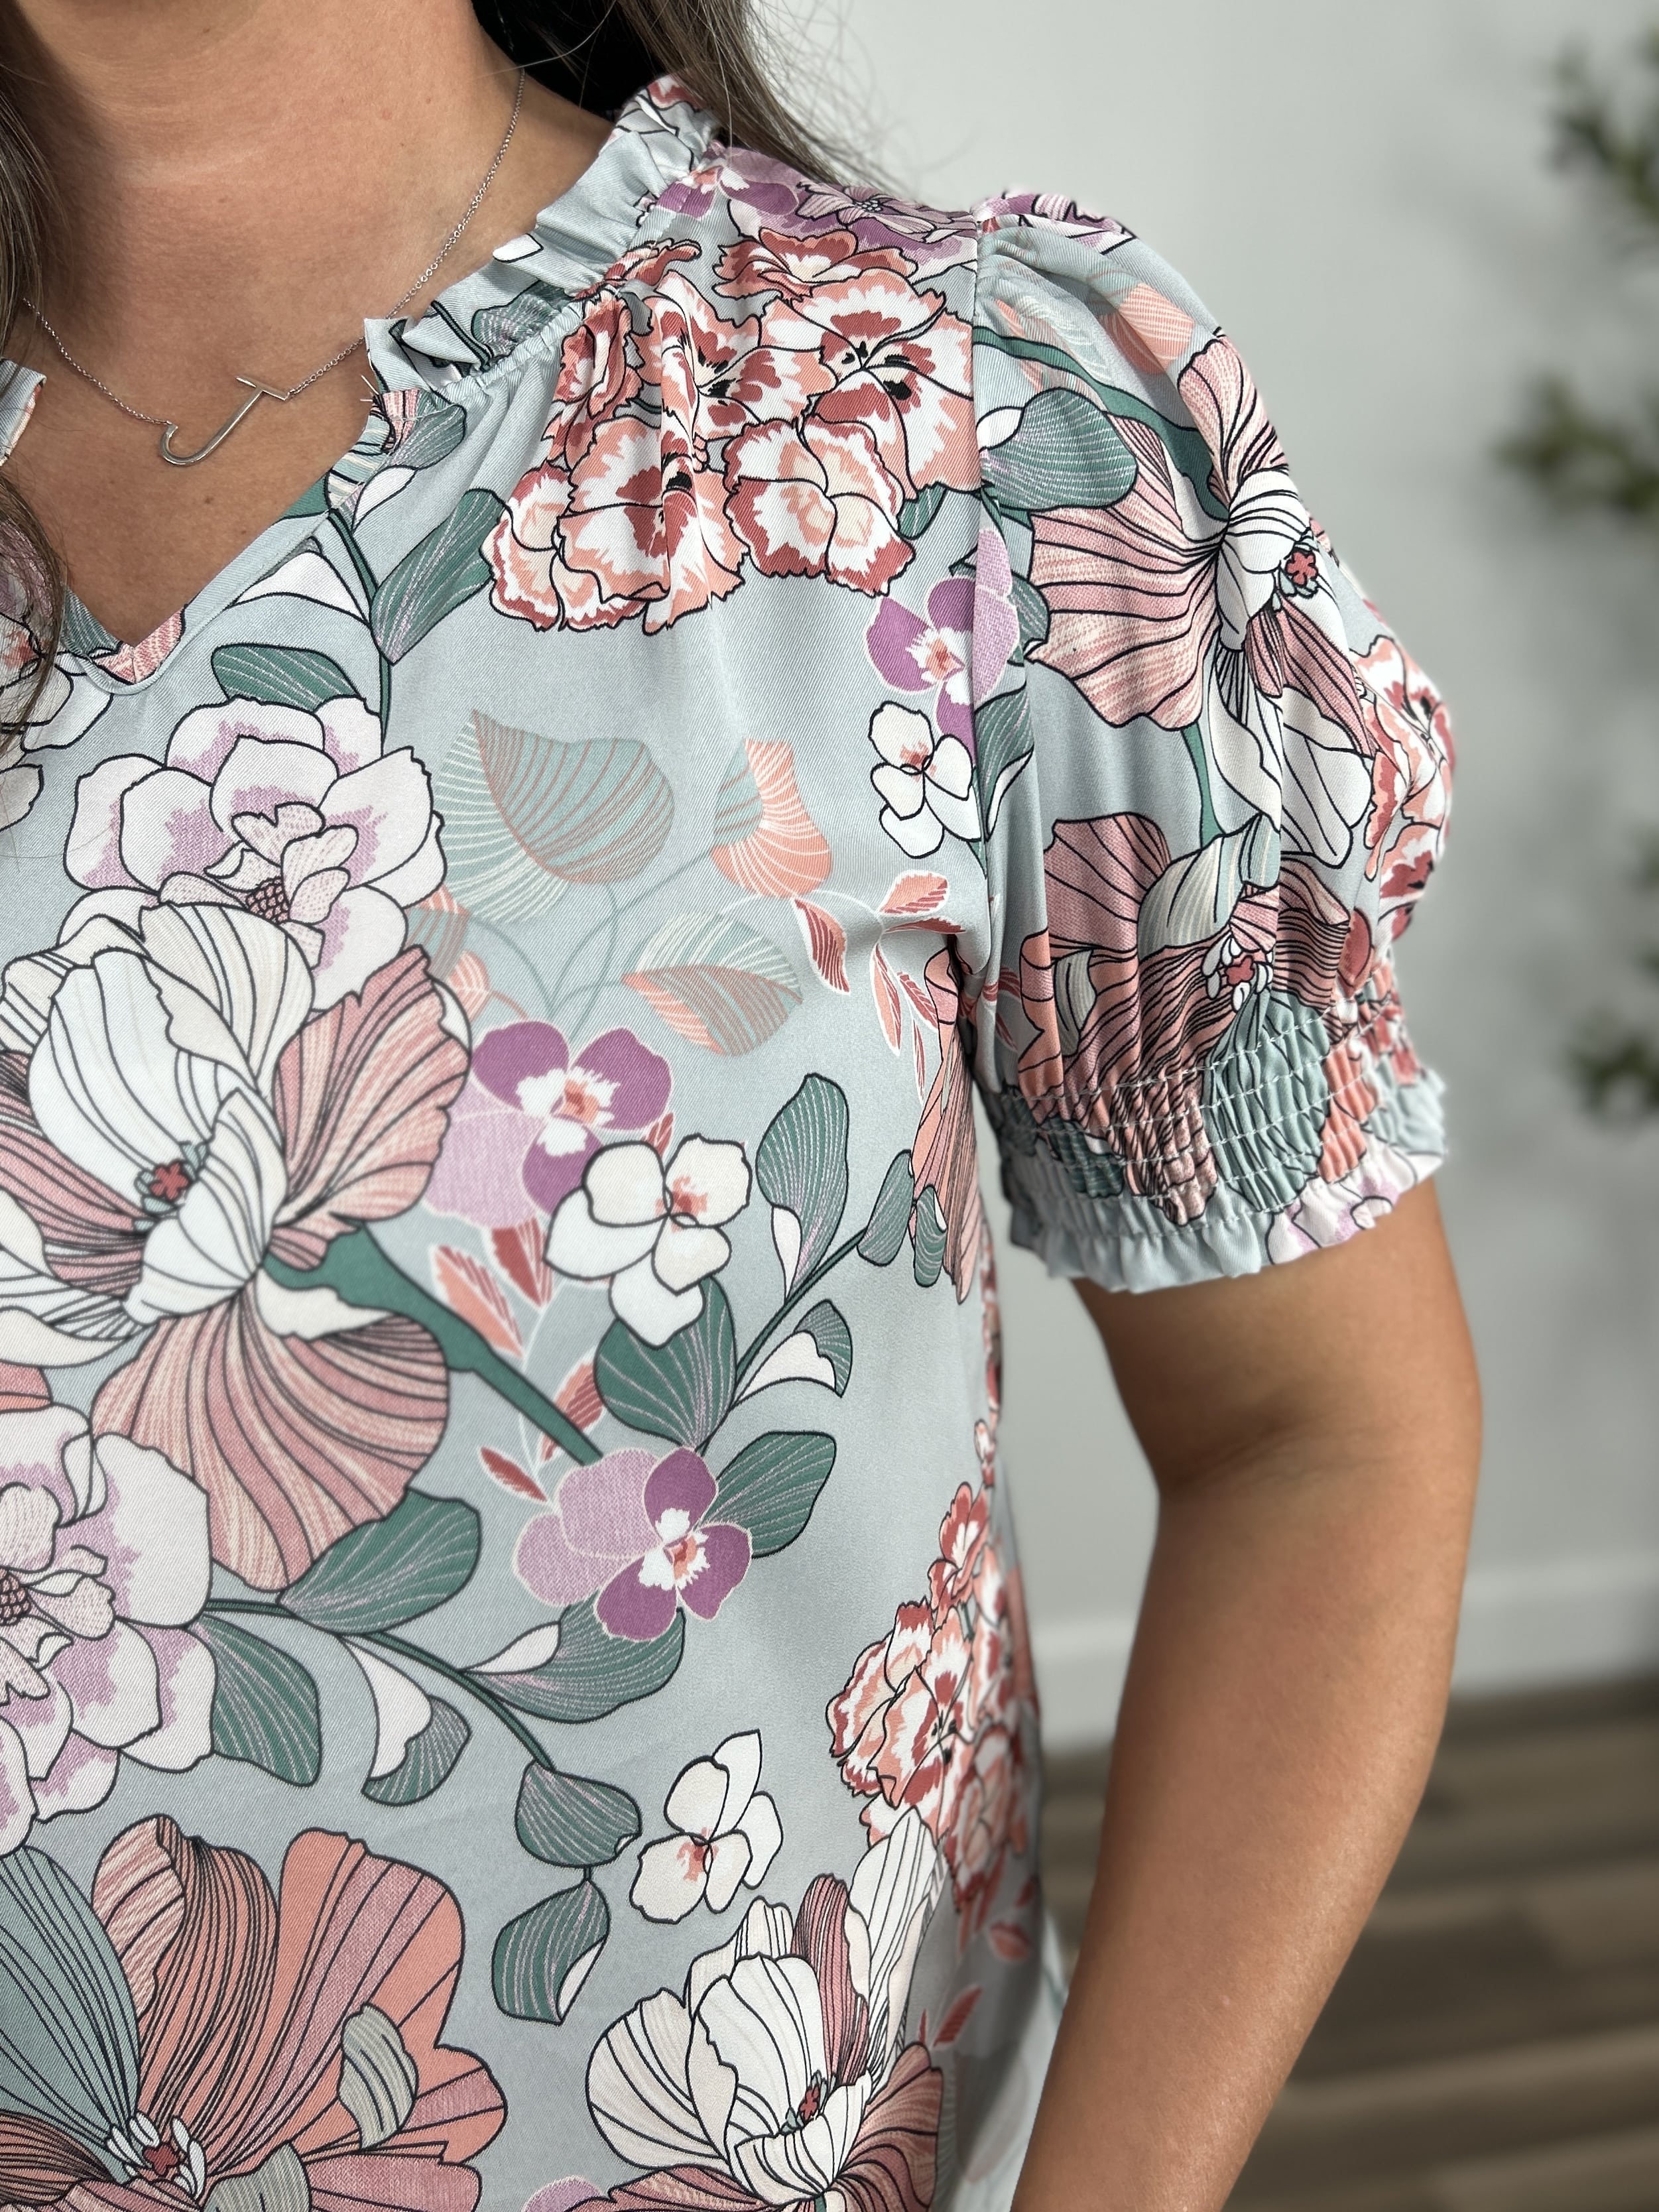 Upclose view of the smocking detail on the women's floral print top.